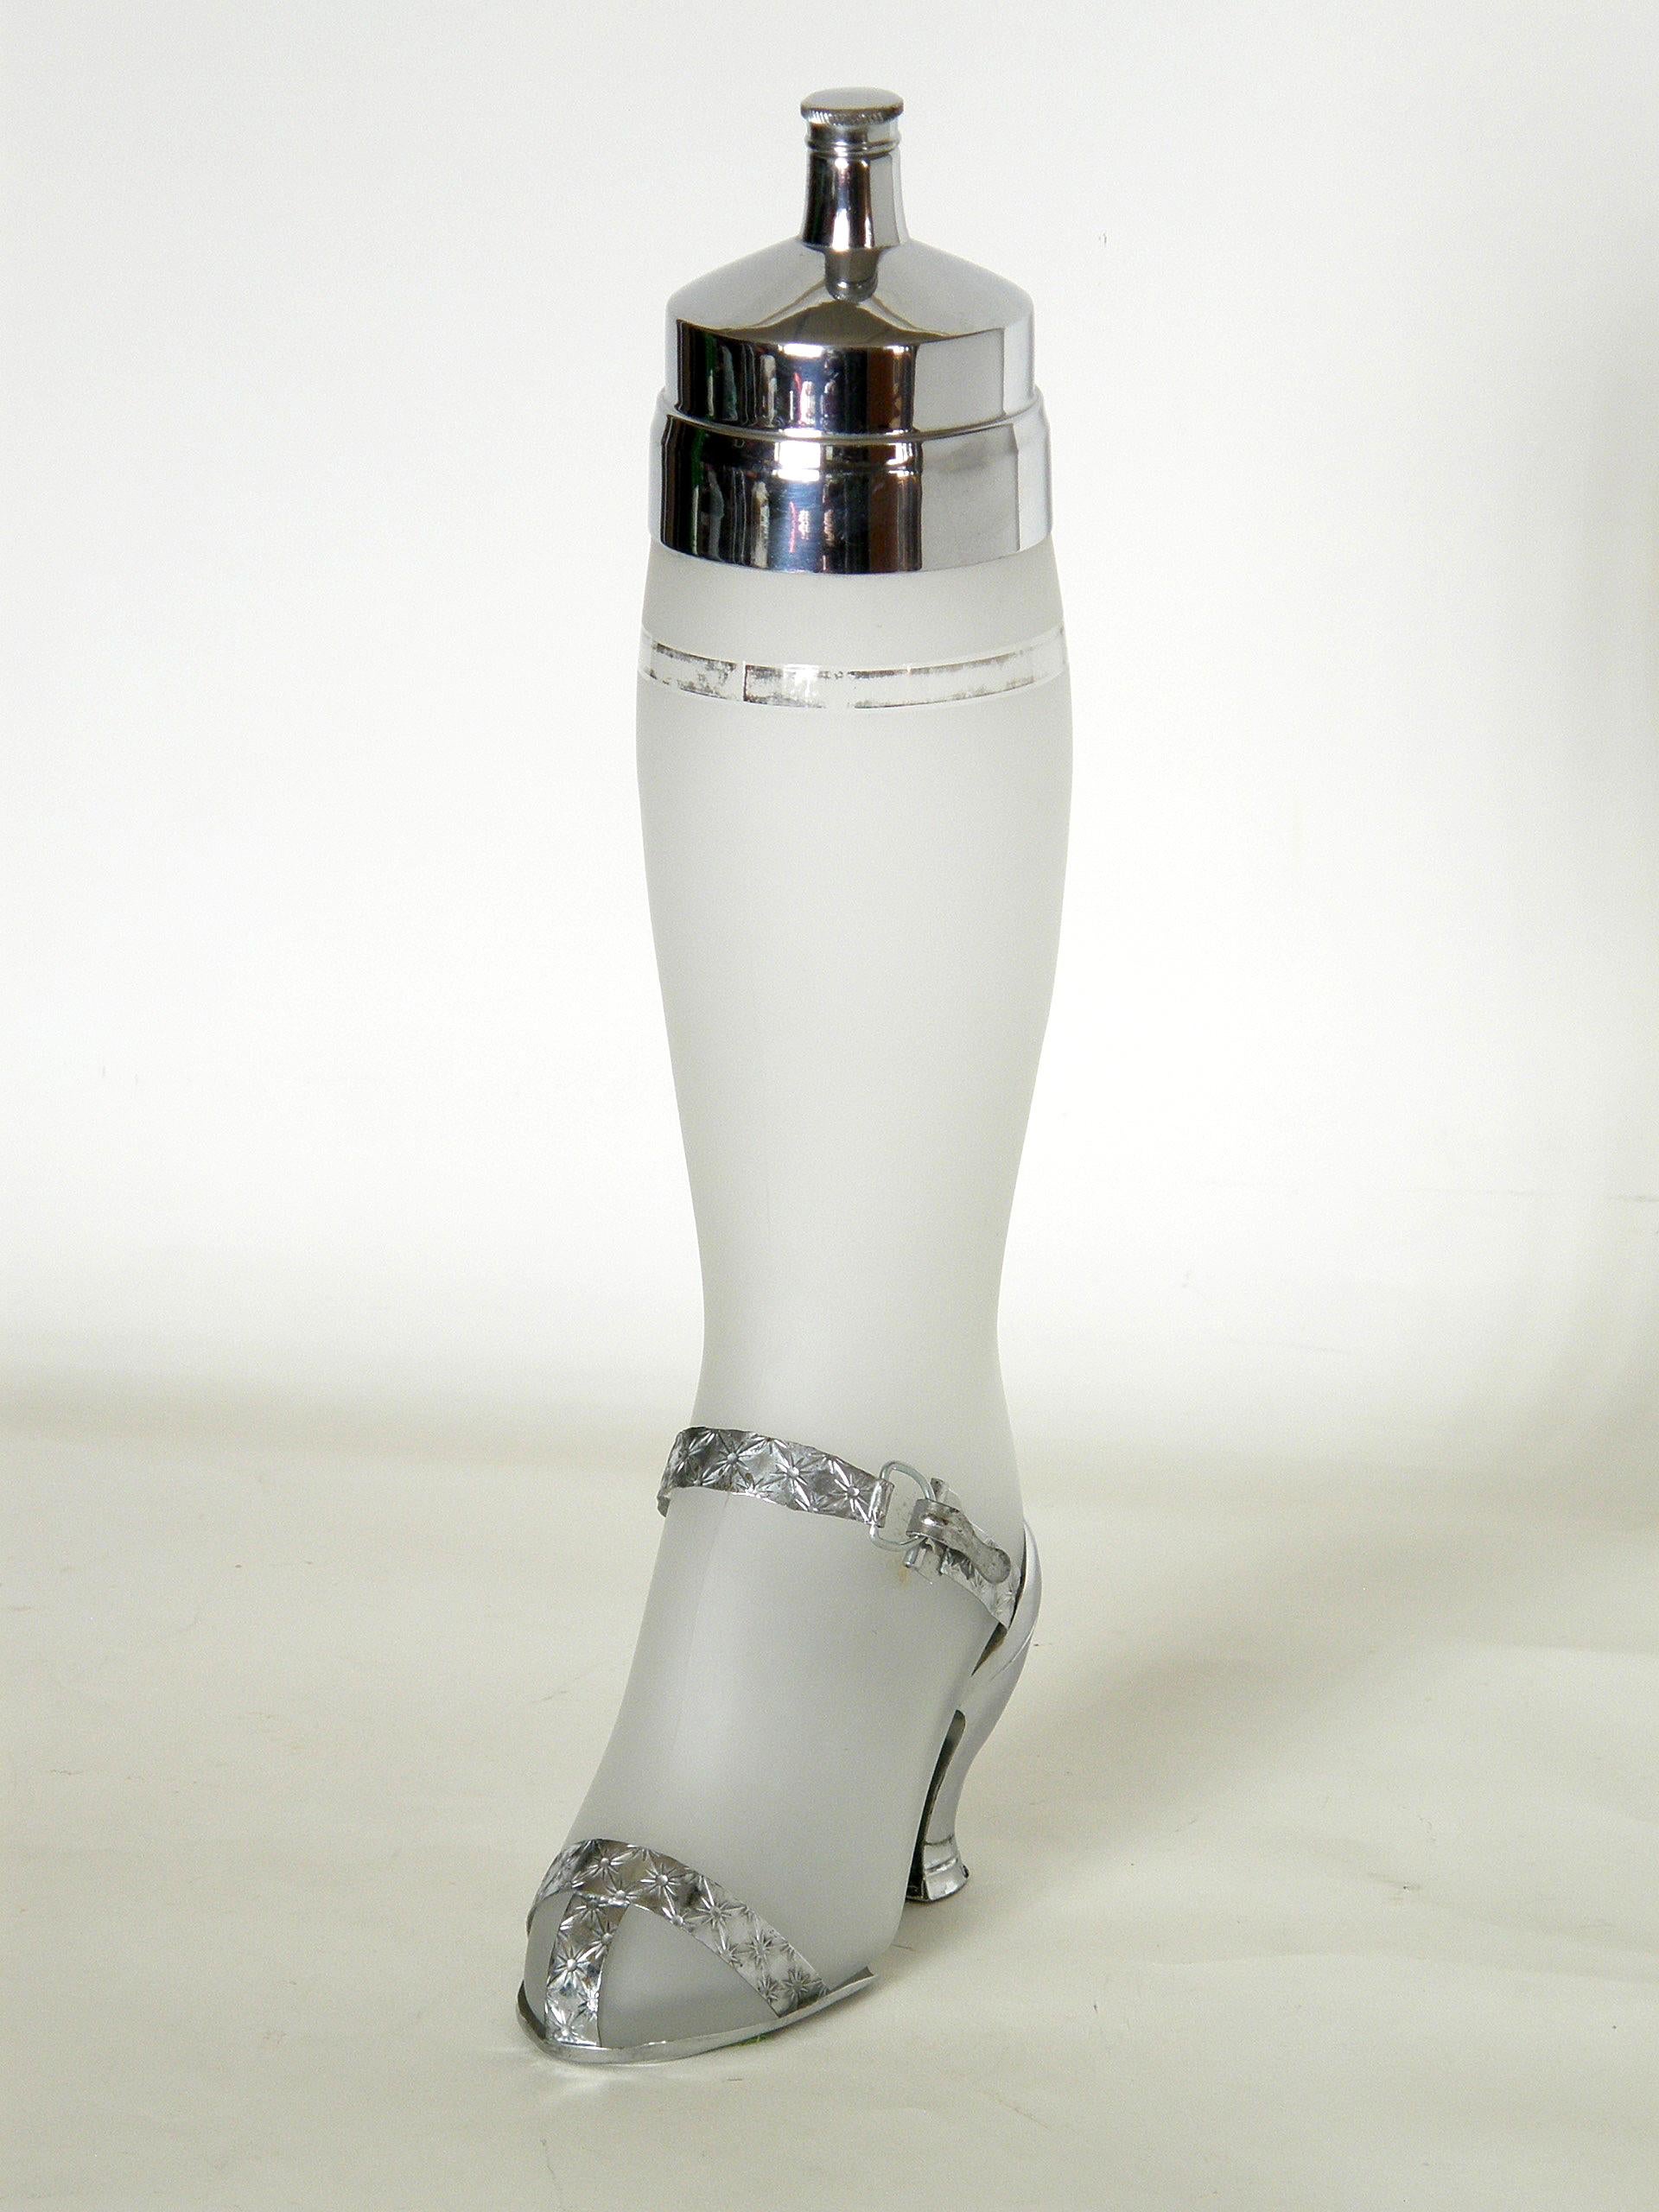 This circa 1937 figural cocktail Shaker has the form of a shapely lady’s leg in a high heeled sandal. The shoe has a functioning clasp on the strap that allows for it be removed for cleaning. The risqué design evokes the ethos of the Art Deco era